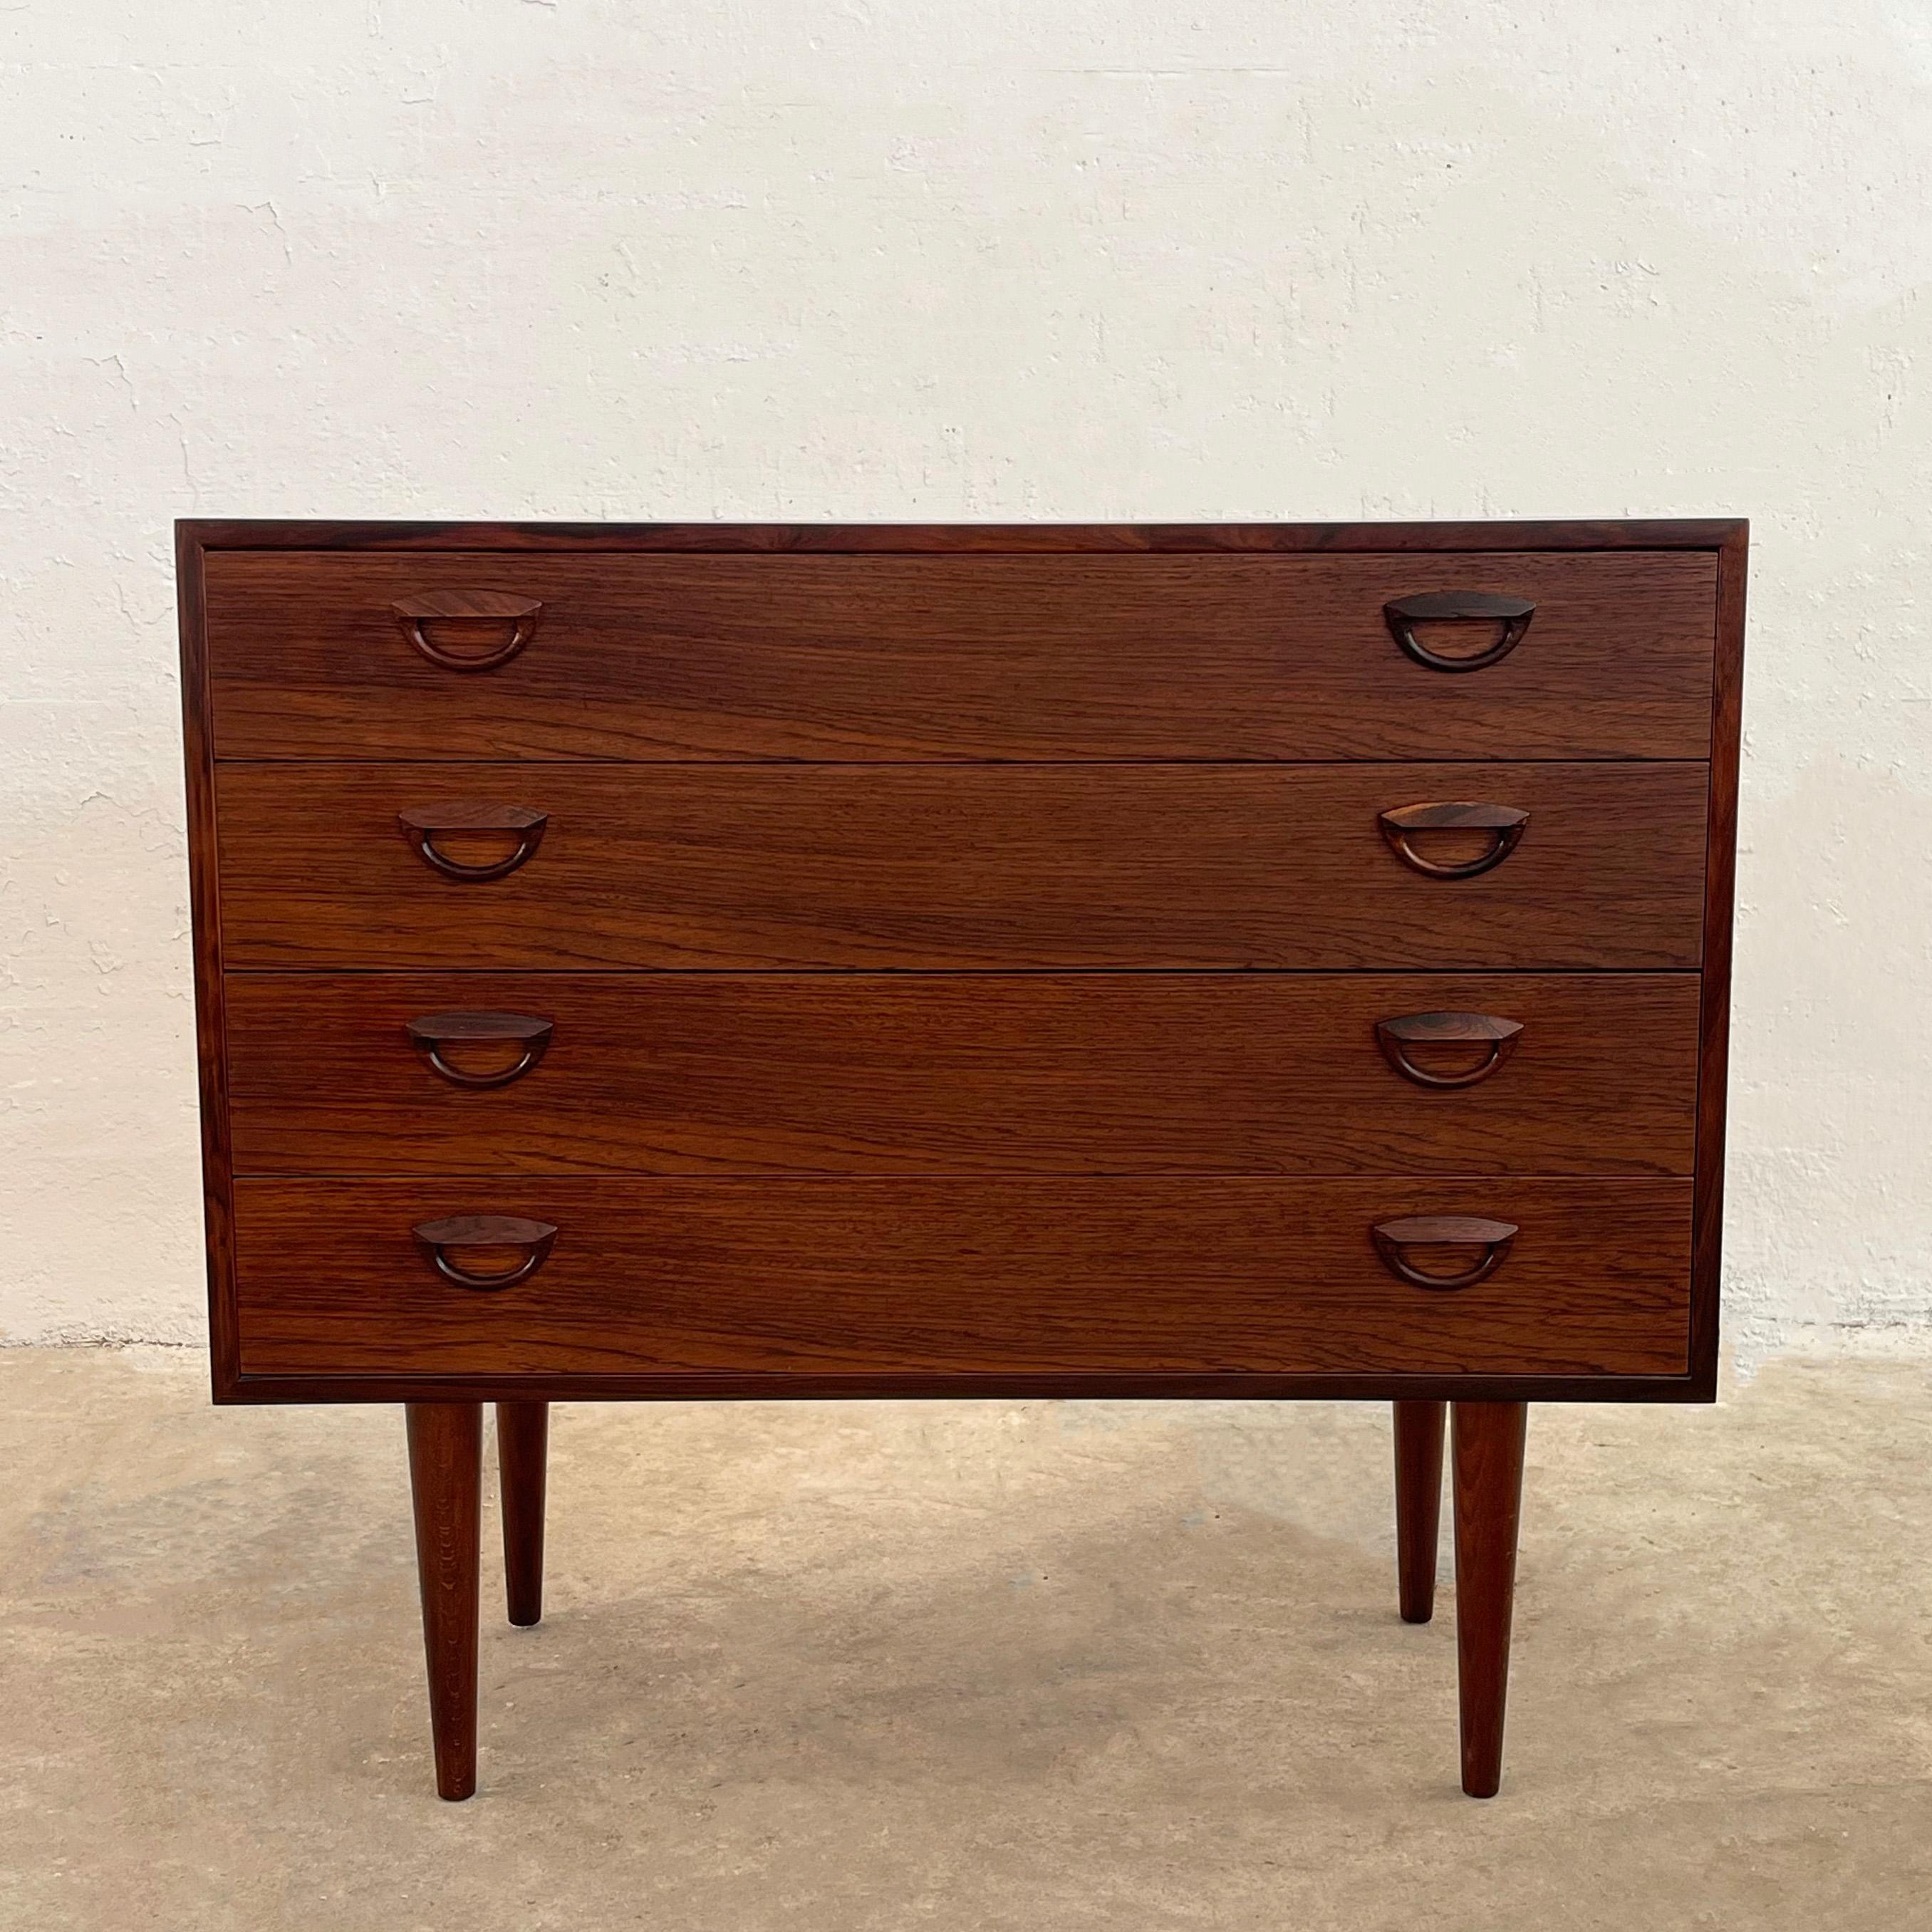 Petite, Danish modern, rosewood dresser by Kai Kristiansen for Feldballes Møbelfabrik features four drawers at 4 inches height with signature eyelid pulls and beautiful rosewood grain throughout. 